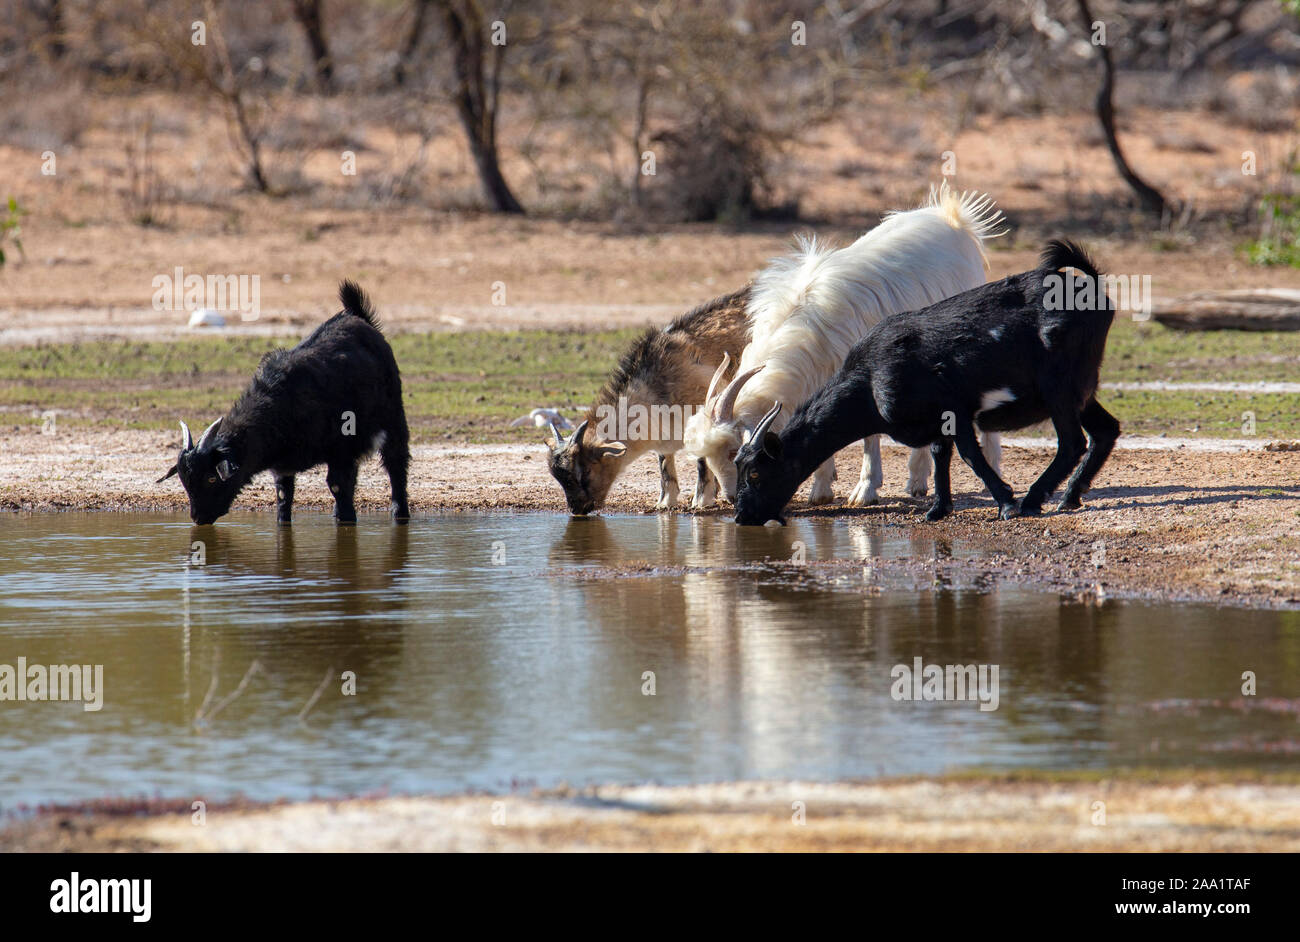 Feral goats drinking from a wetland after rain in outback Australia Stock Photo